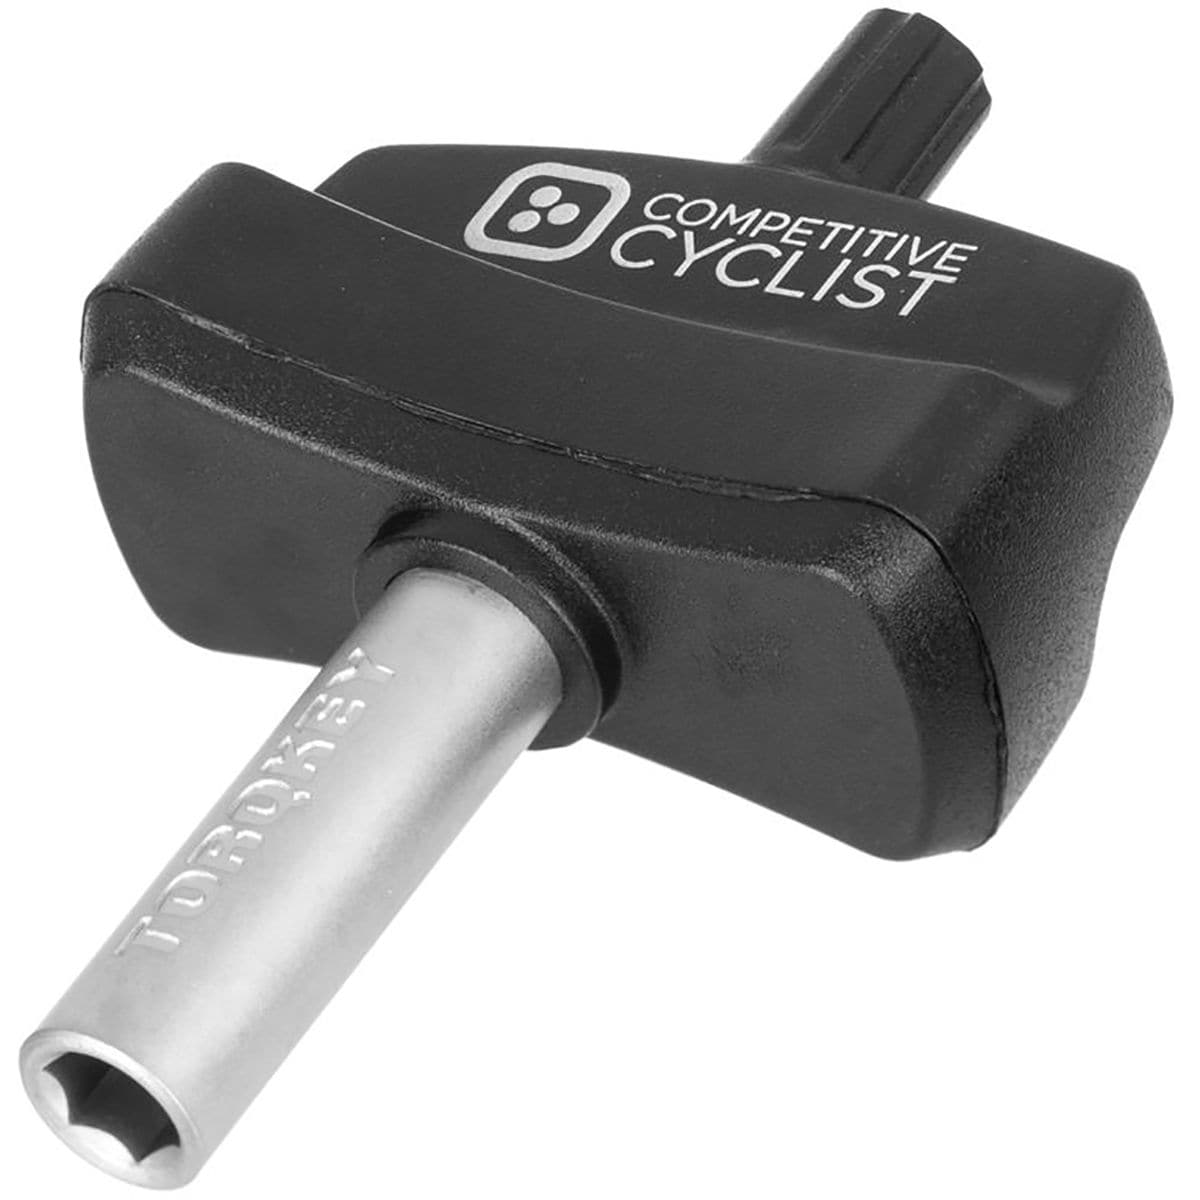 Competitive Cyclist Torque Tool